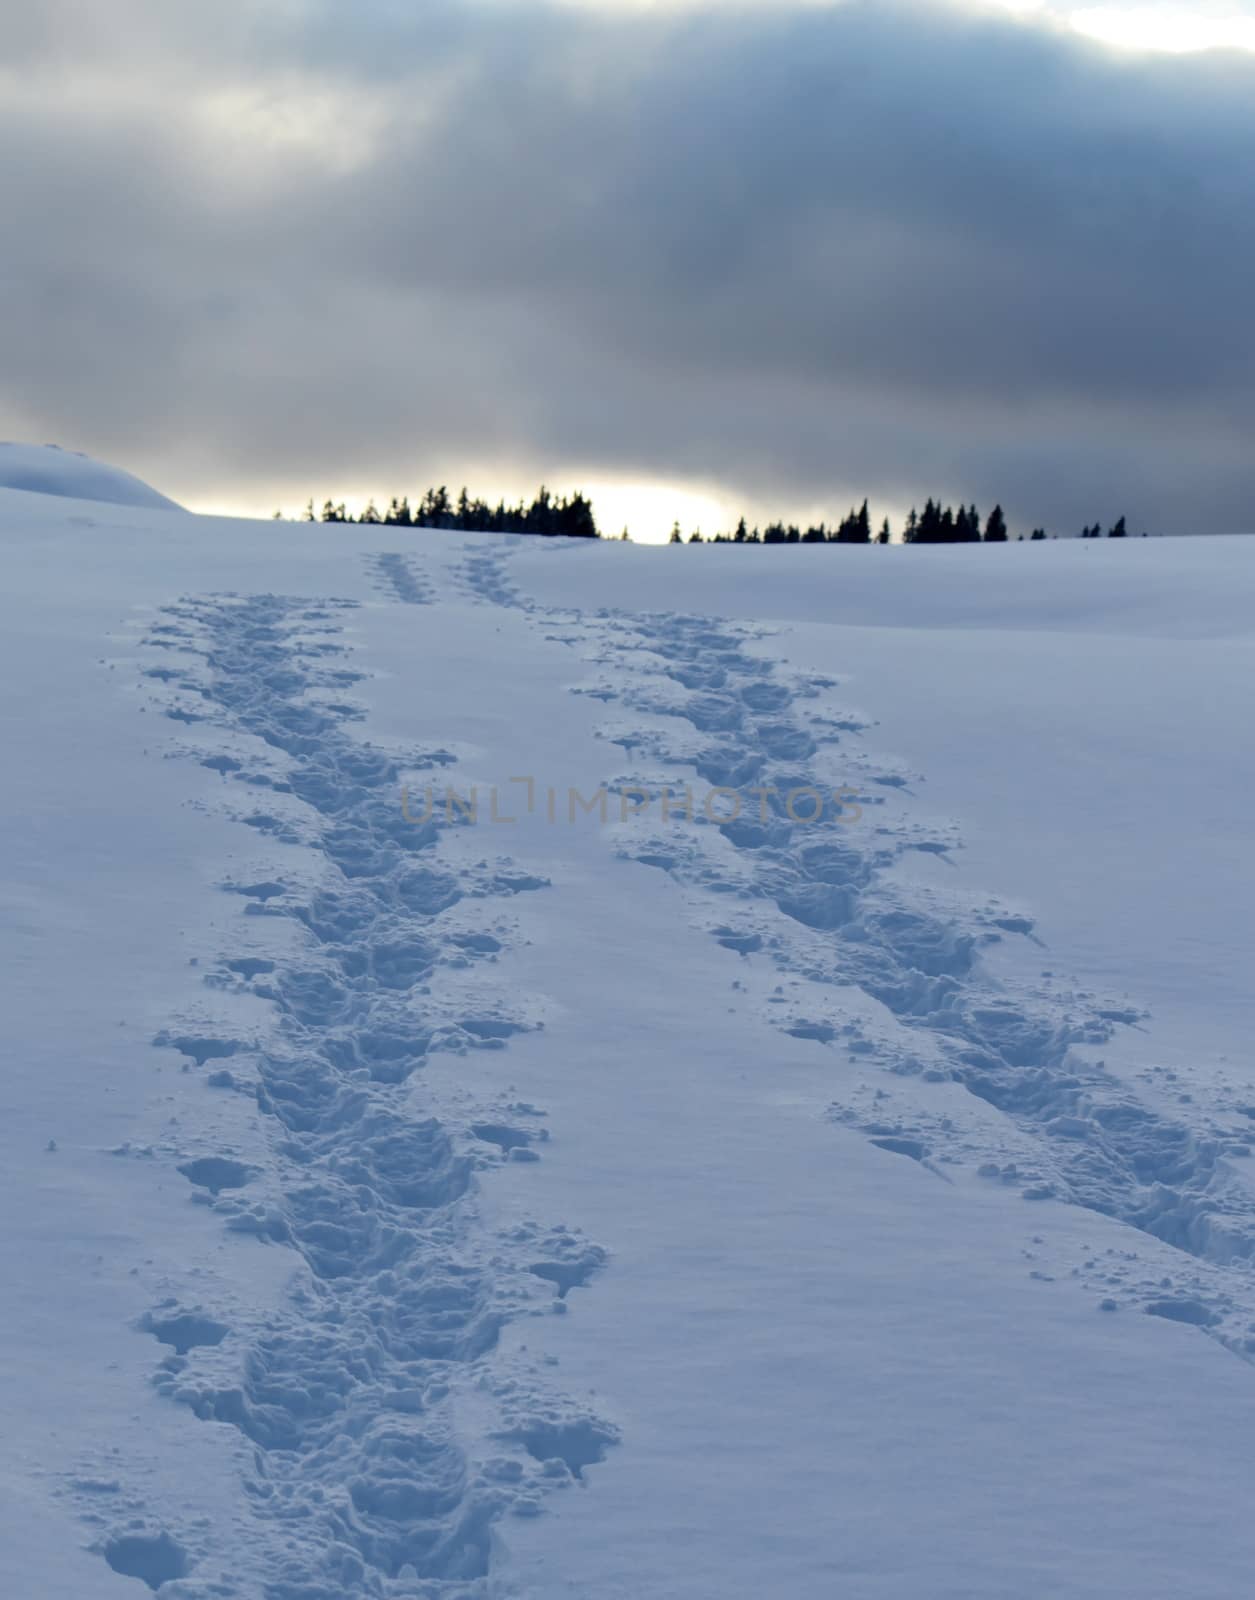 Footsteps in the snow by Elenaphotos21